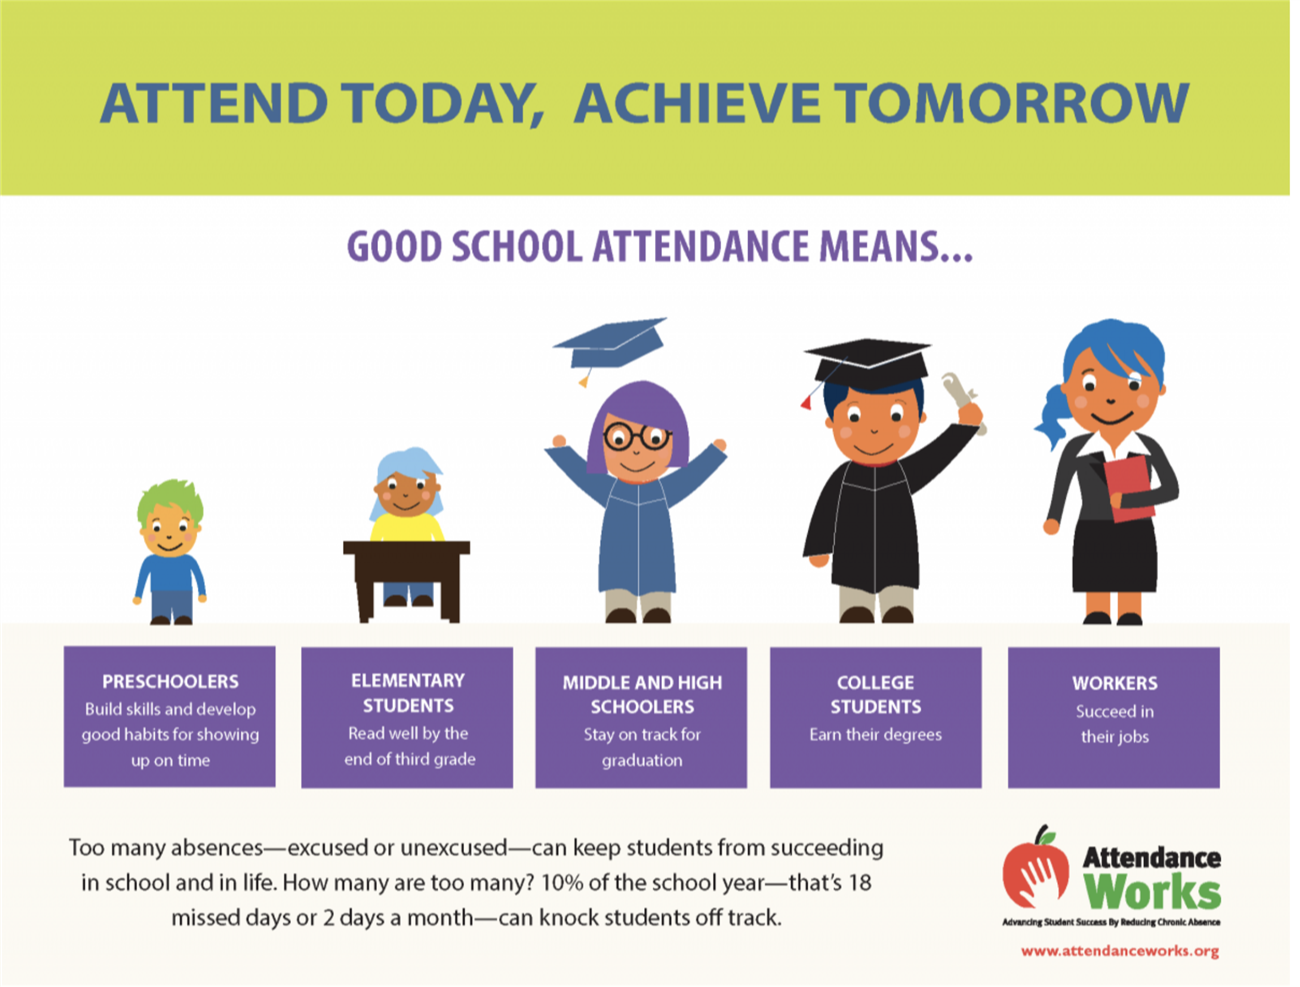  A picture with attendance breakdown Good School Attendance Means Preschoolers build skills and develop good habits for showing up on time Elementary students read well by the end of third grade Middle and High schooles stay on tract for graduation College students earn their degrees, workers succeed in their jobs